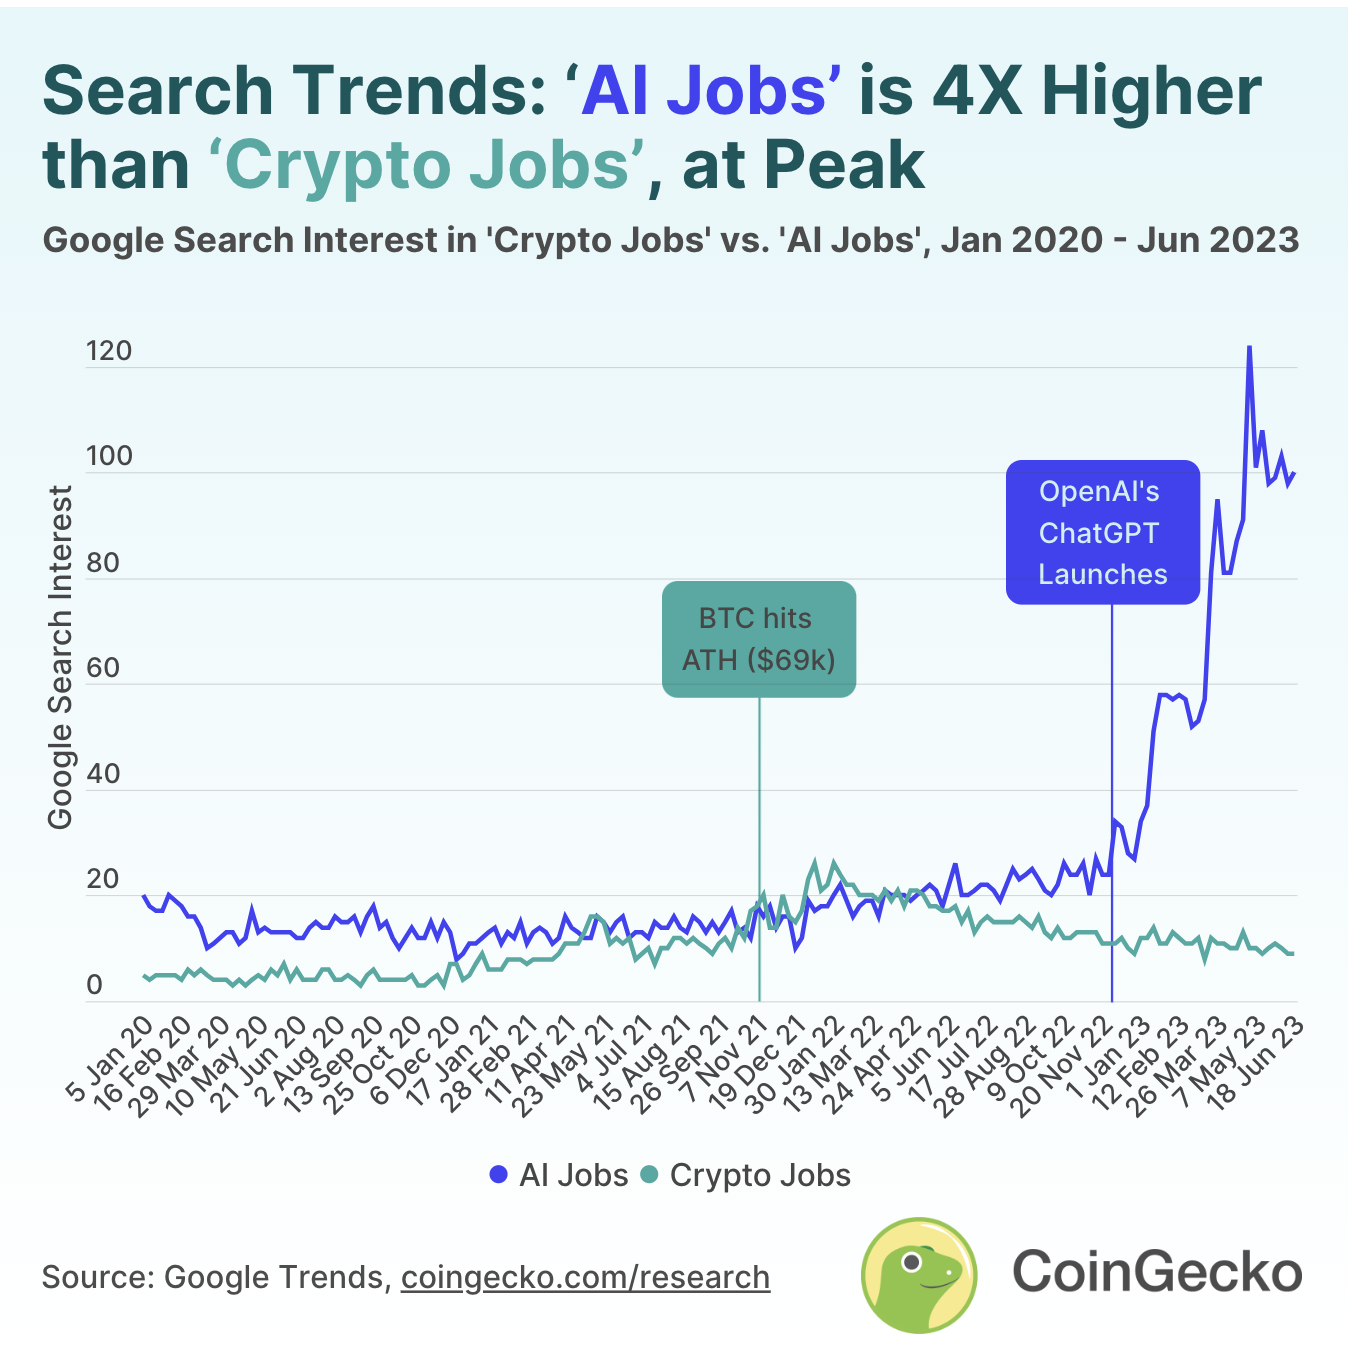 Coingecko's chart of search trends: ‘AI Jobs’ vs ‘Crypto Jobs’